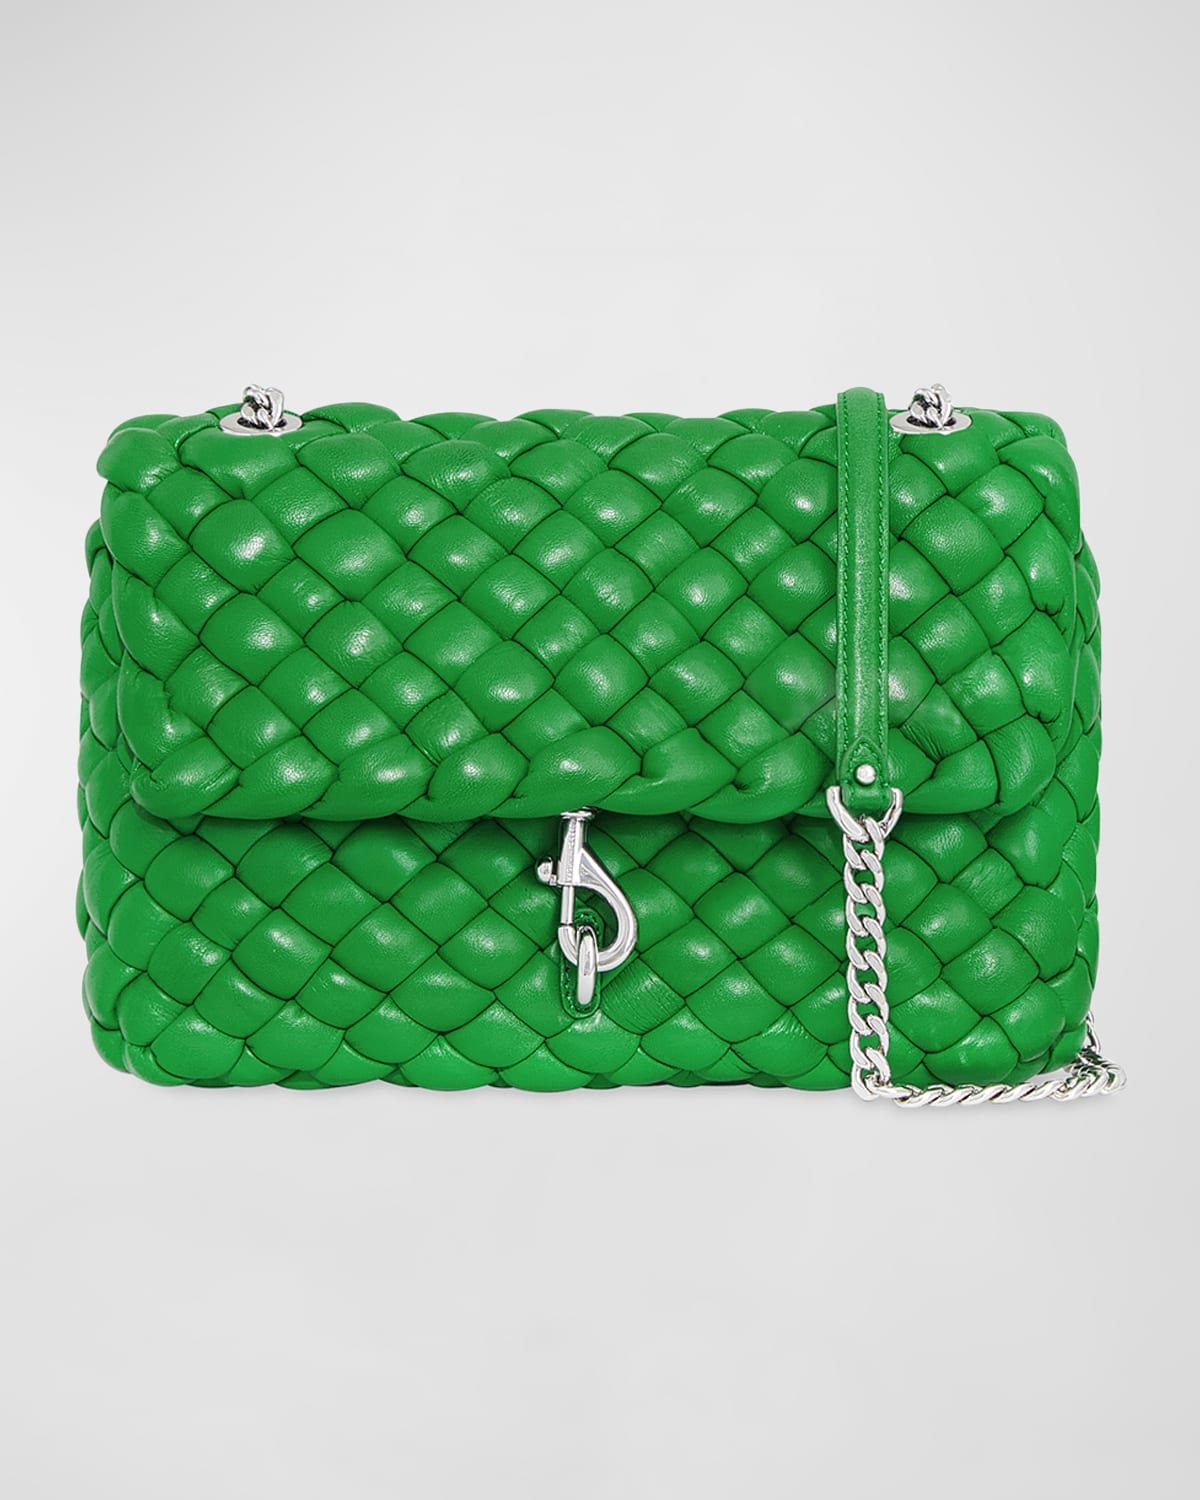 Rebecca Minkoff Edie Flap Quilted Leather Chain Shoulder Bag | Neiman ...